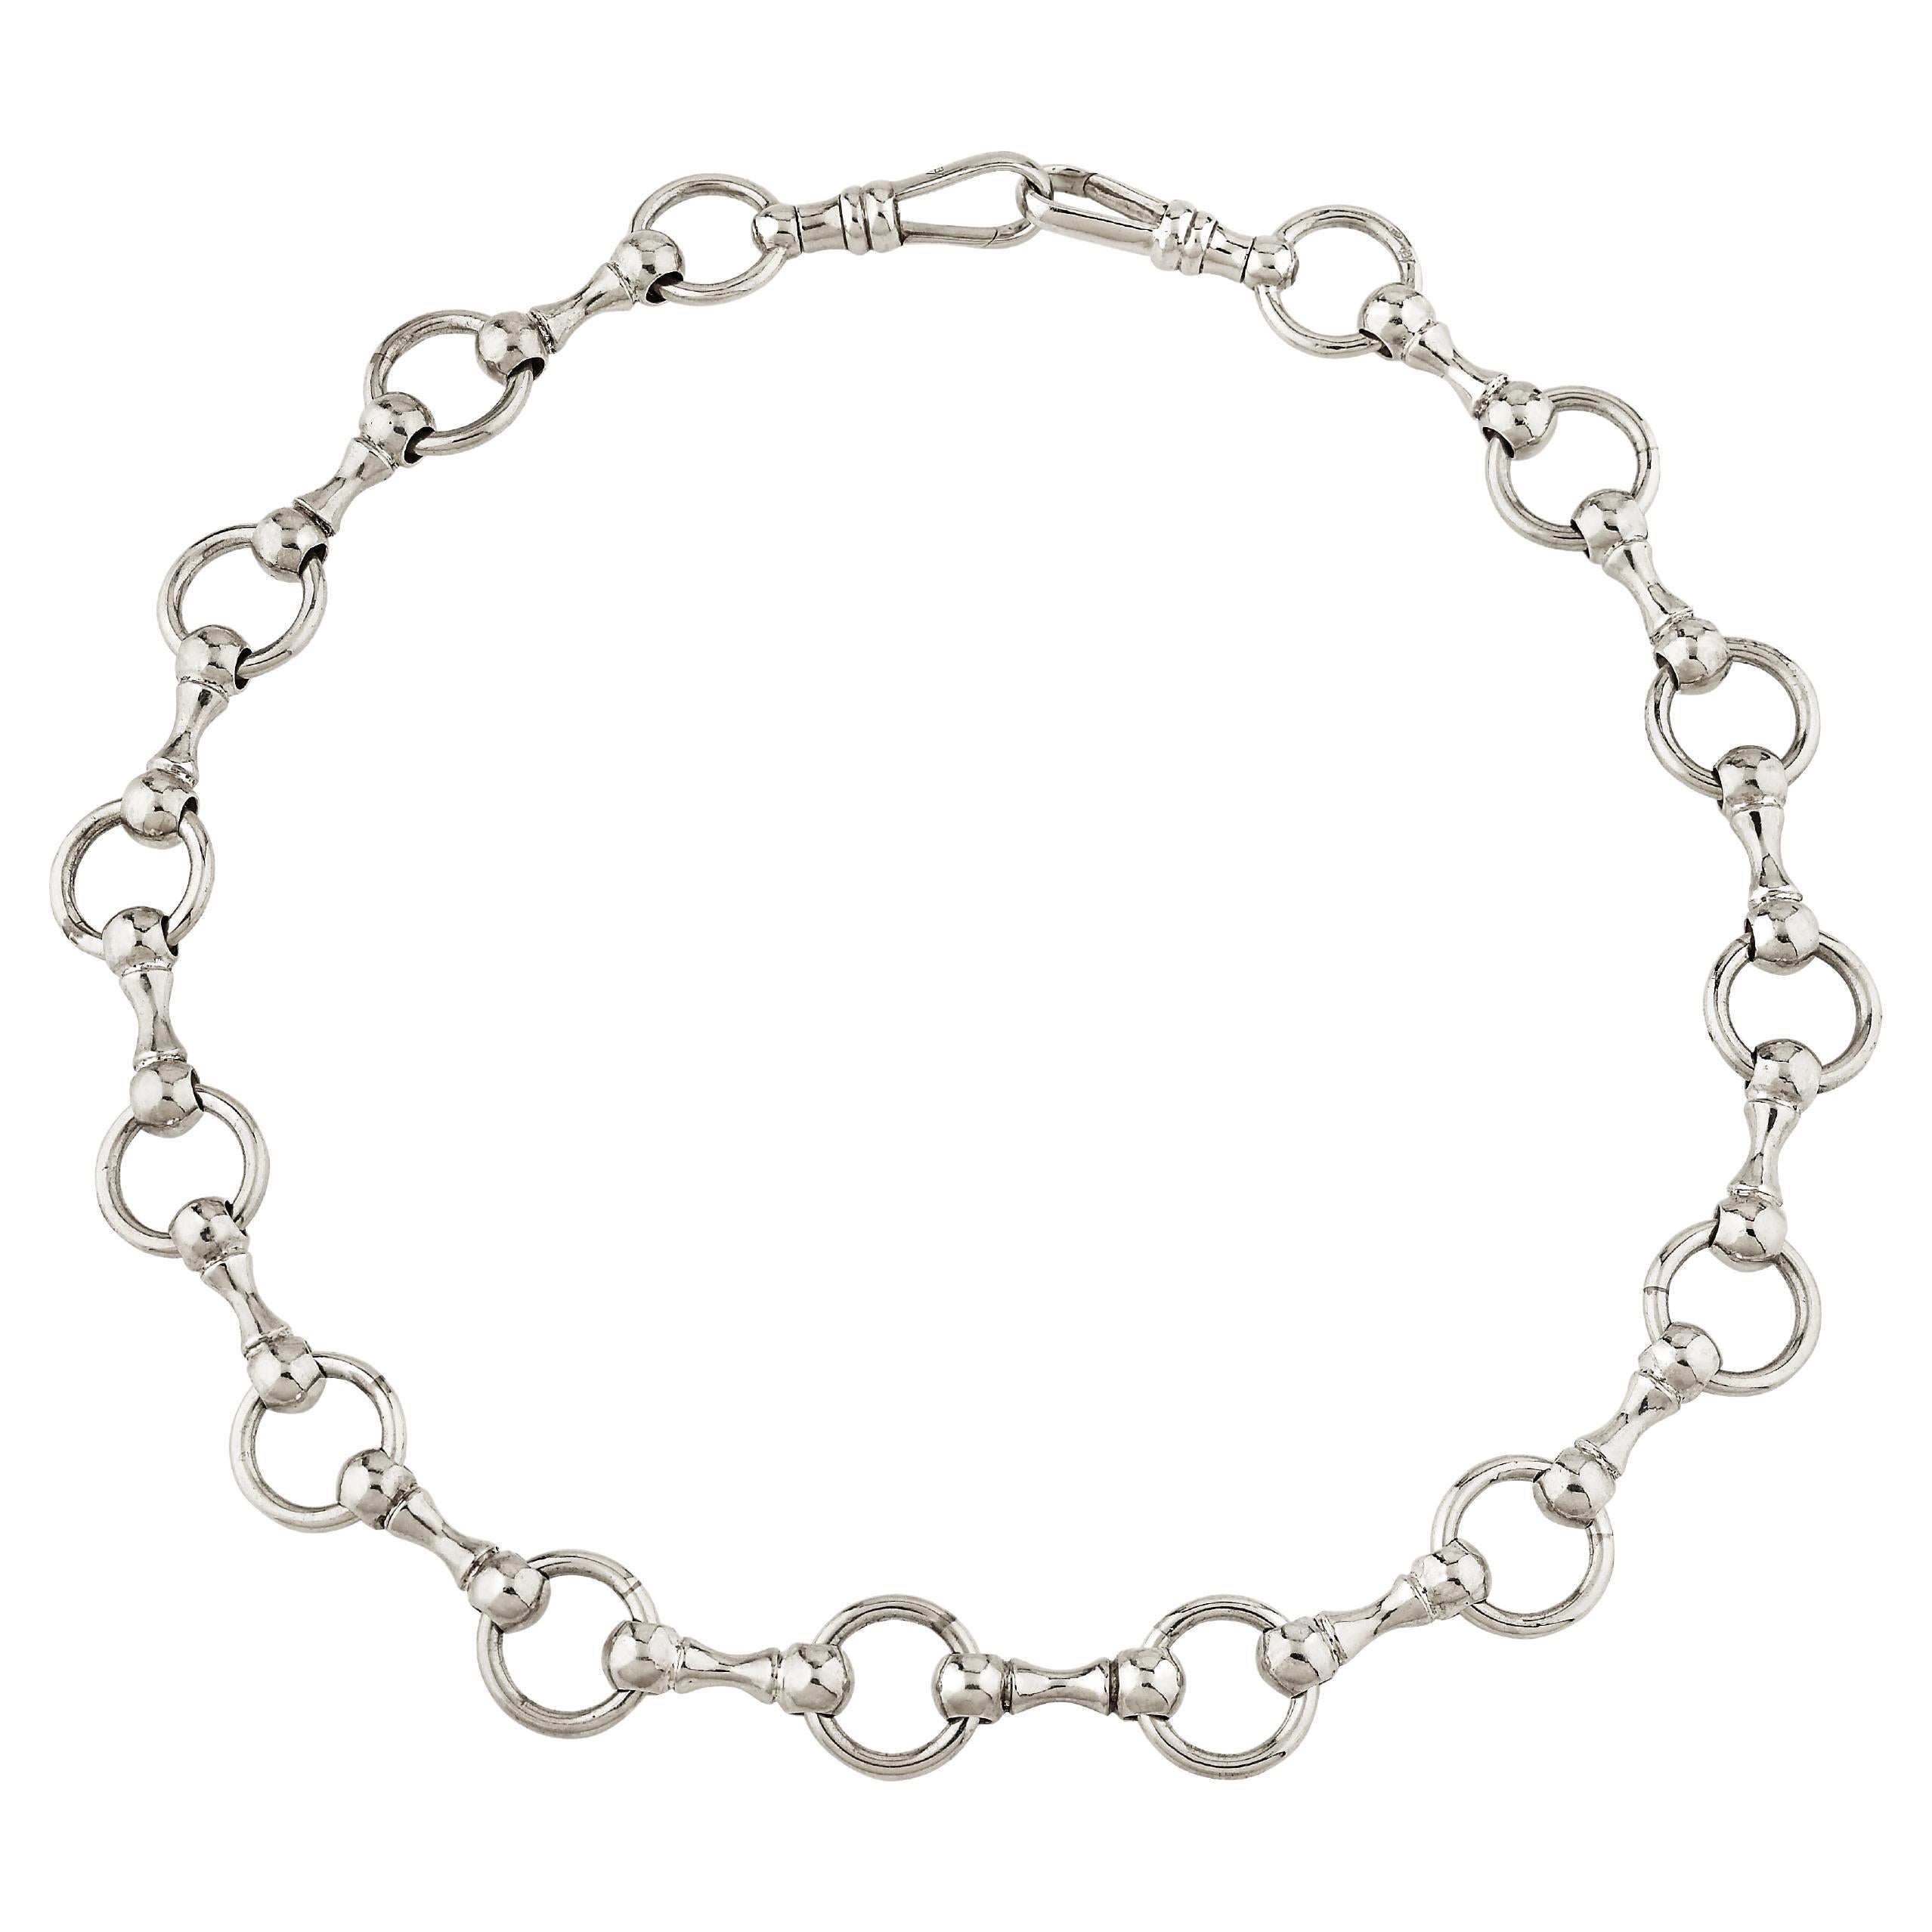 Betony Vernon "O'Ring Signature Chain Collier Large"Sterling Silver 925 in Stock